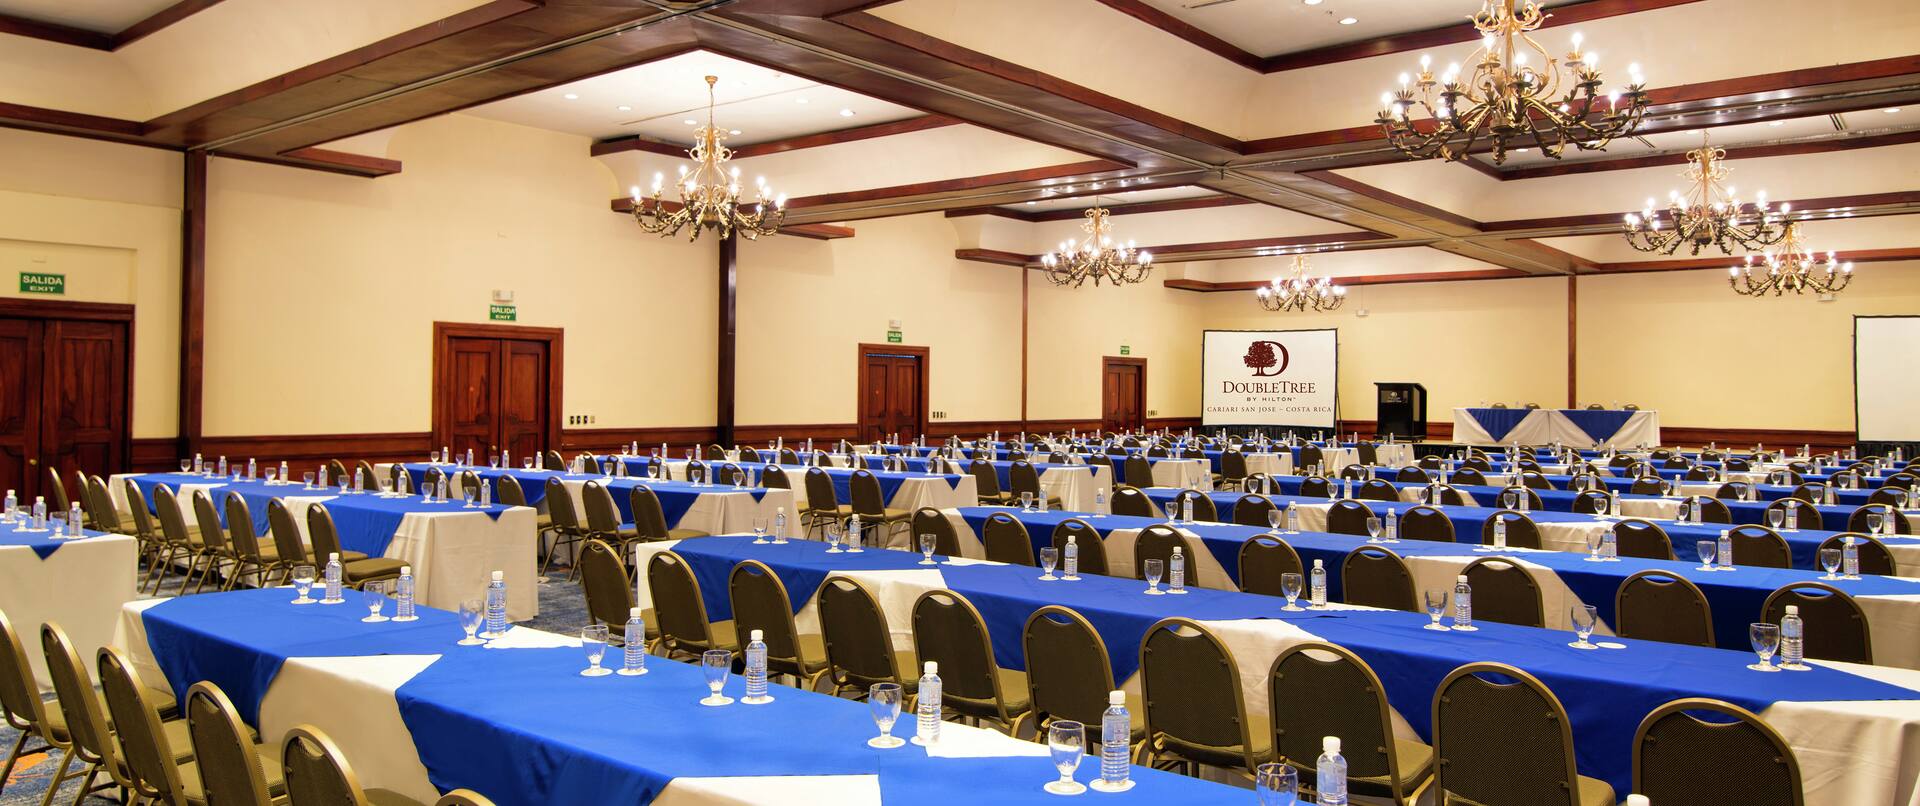 San Jose Events & Conferences at DoubleTree Cariari